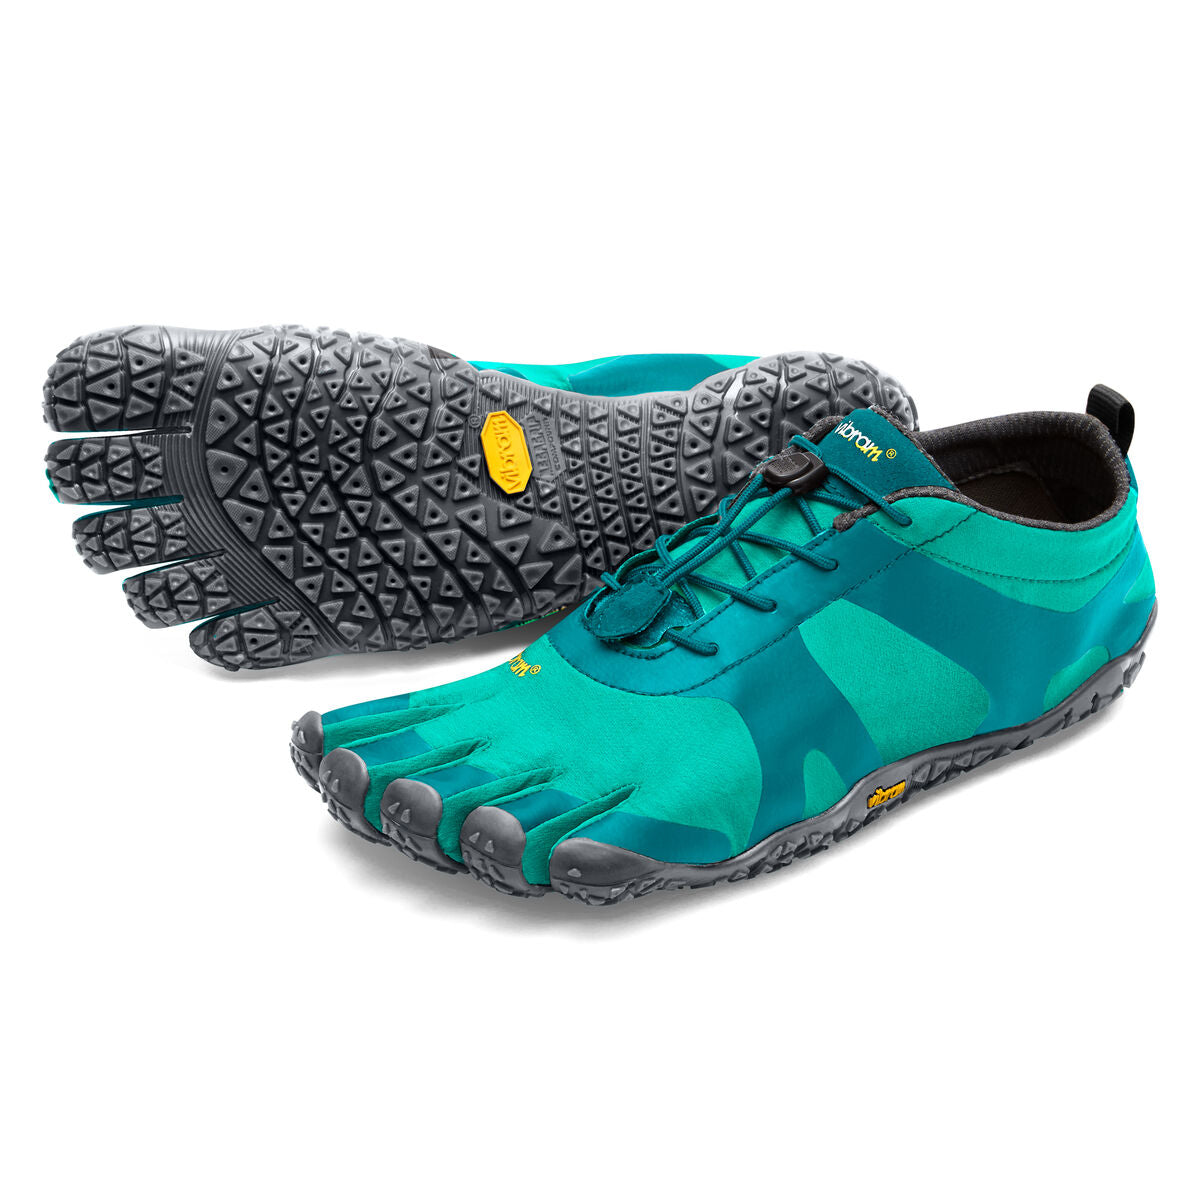 Women's Vibram Five Fingers V-Alpha Hiking Shoe in Teal/Blue from the front